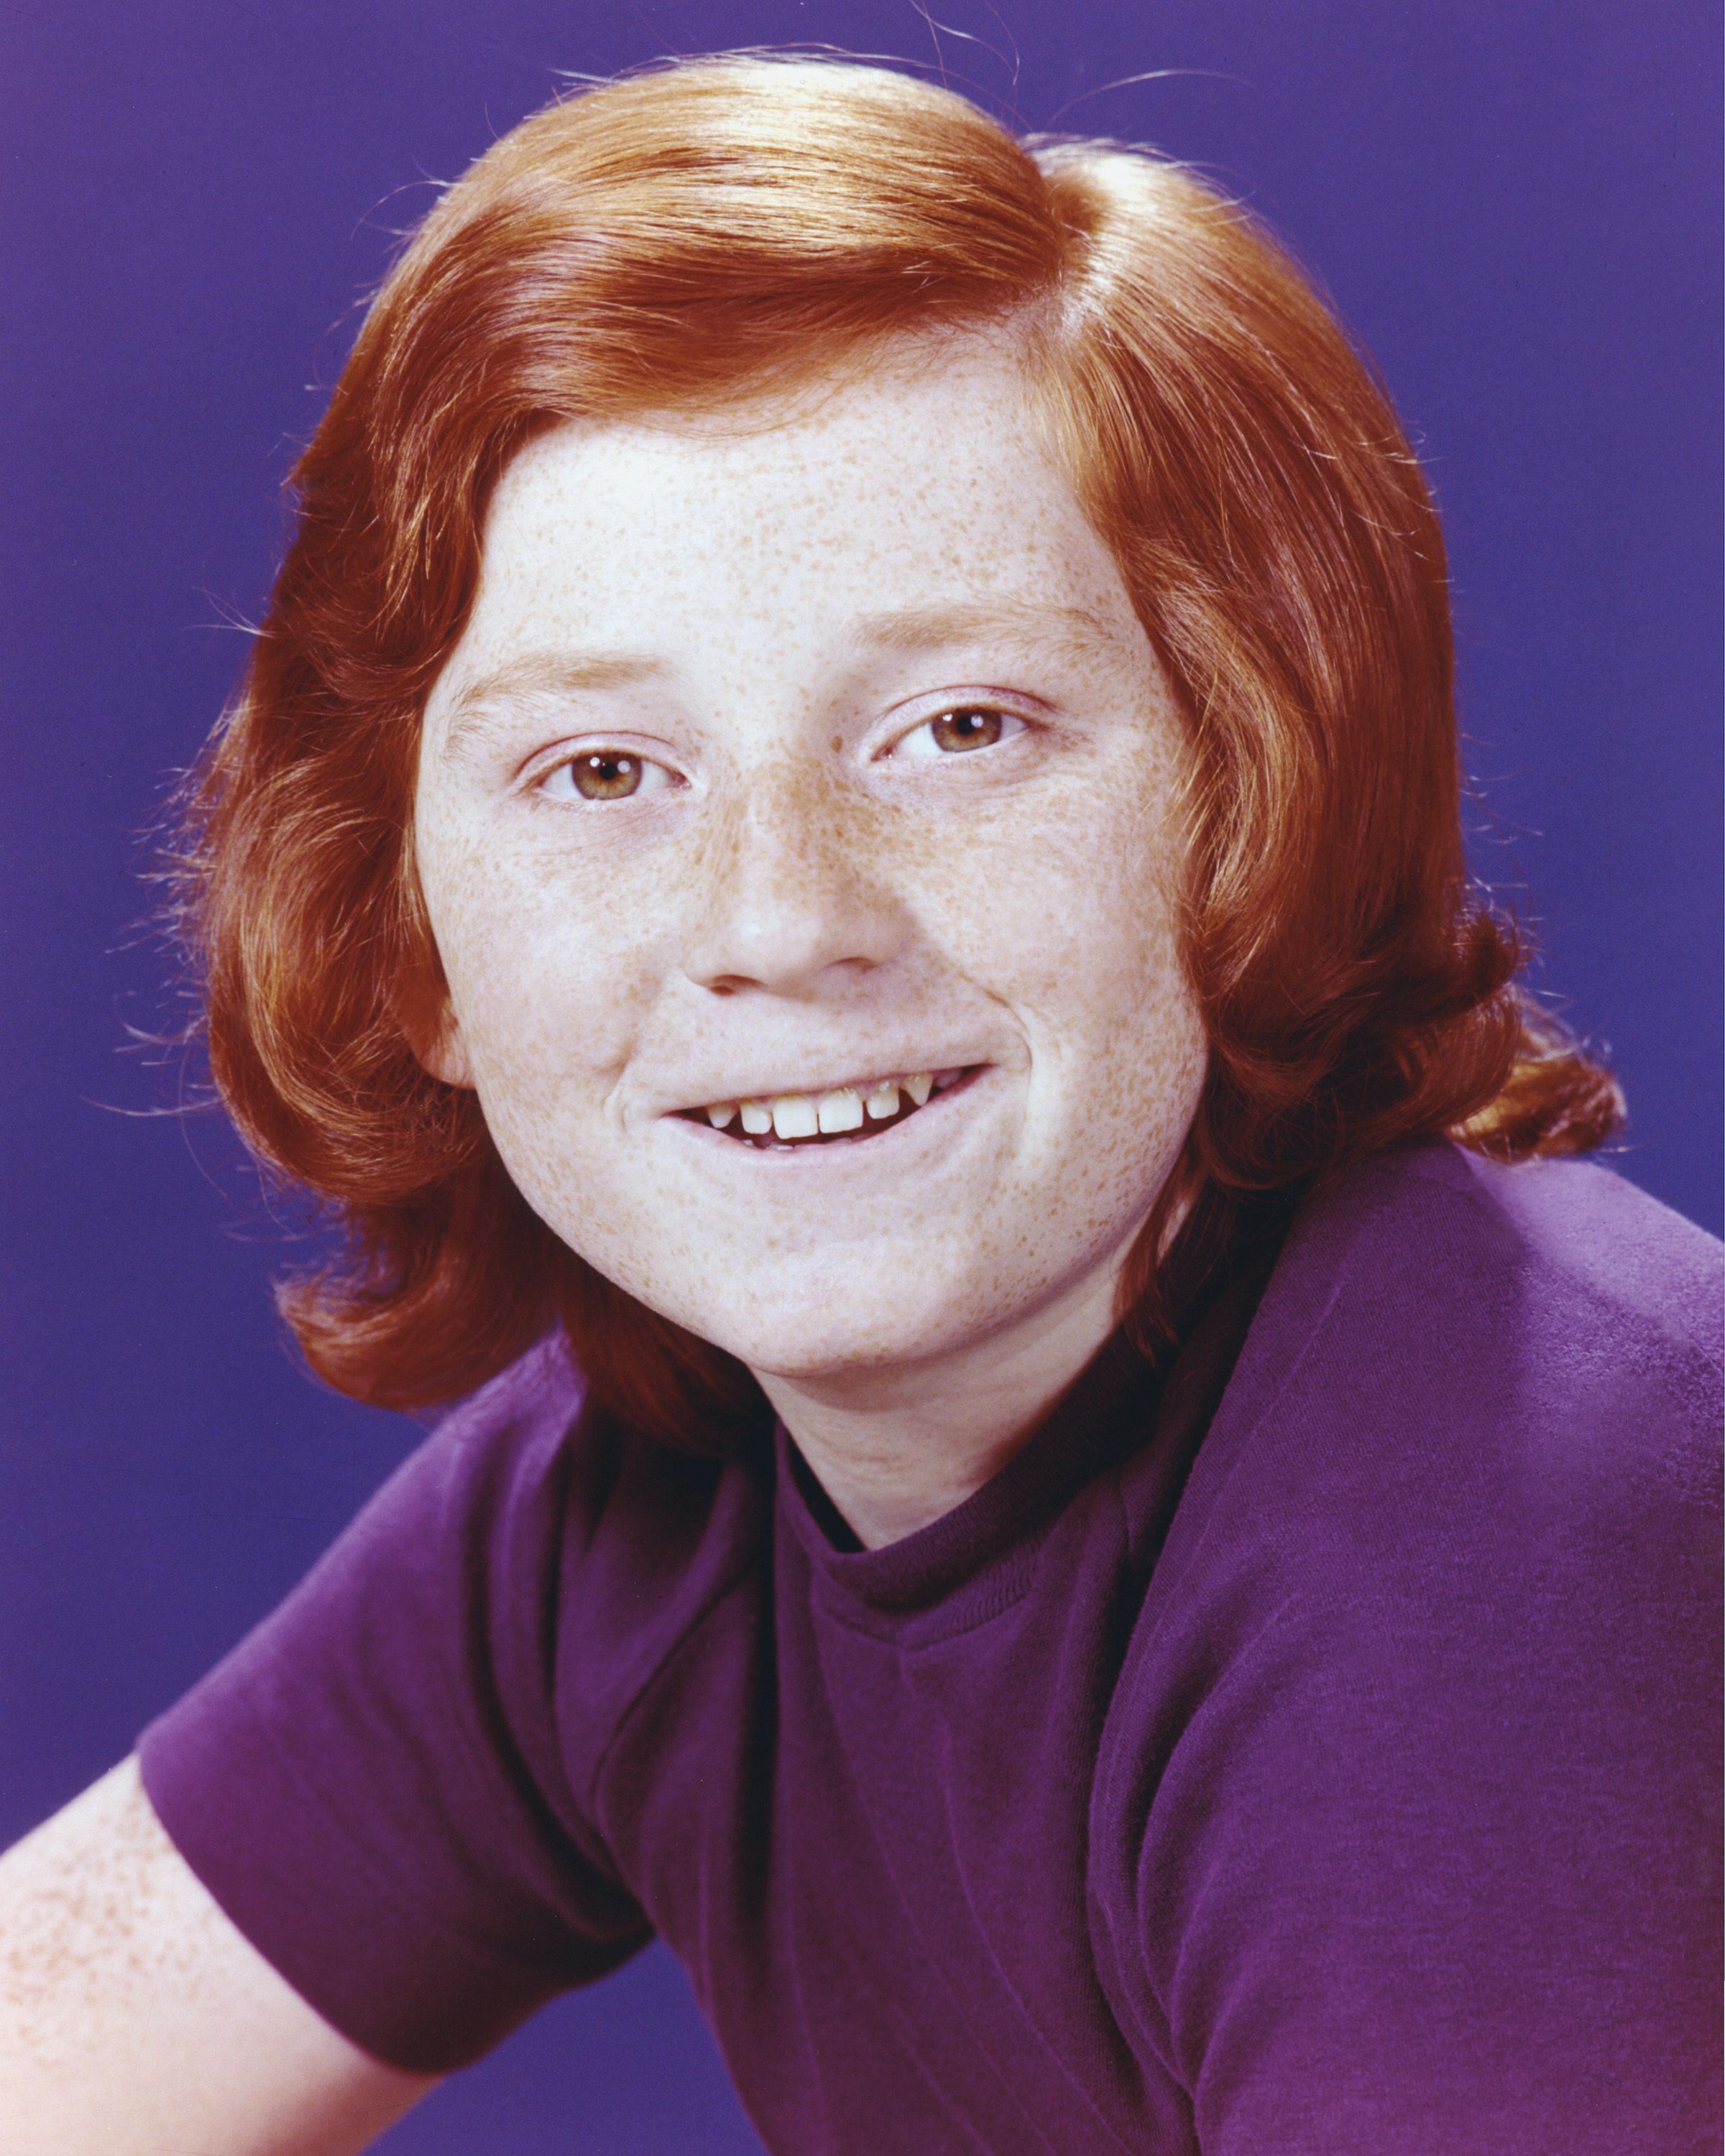 Danny Bonaduce as Danny Partridge in the hit sitcom "The Partridge Family," circa 1970 | Source: Getty Images